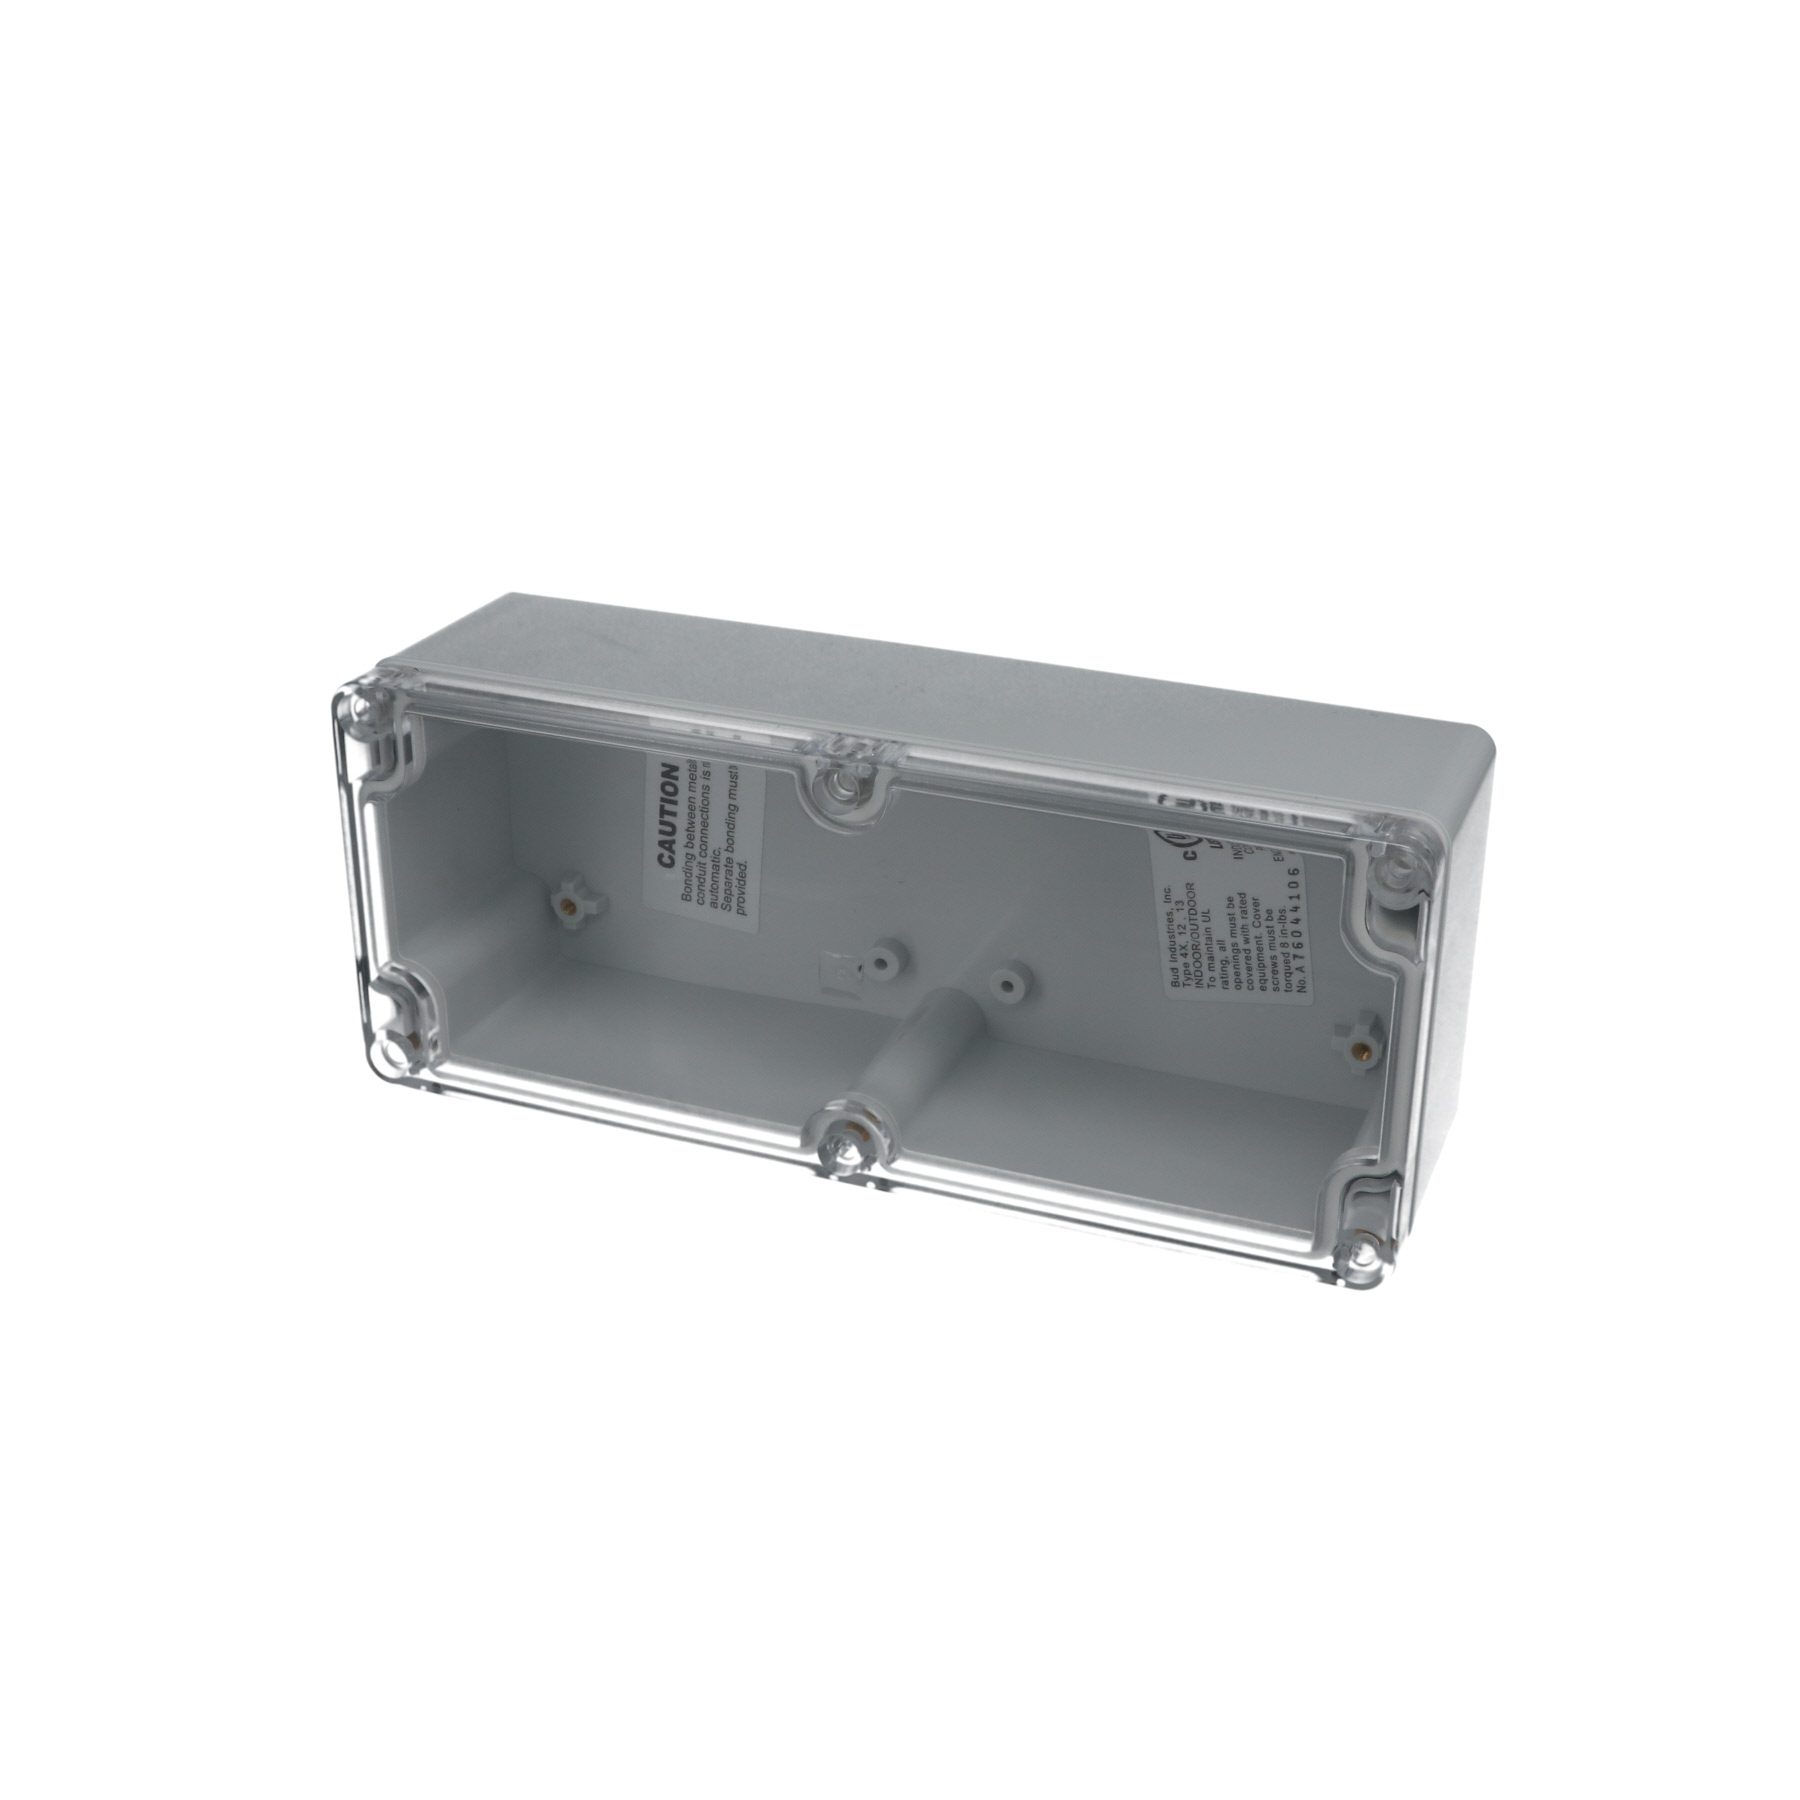 IP65 NEMA 4X Box with Clear Cover PN-1326-C